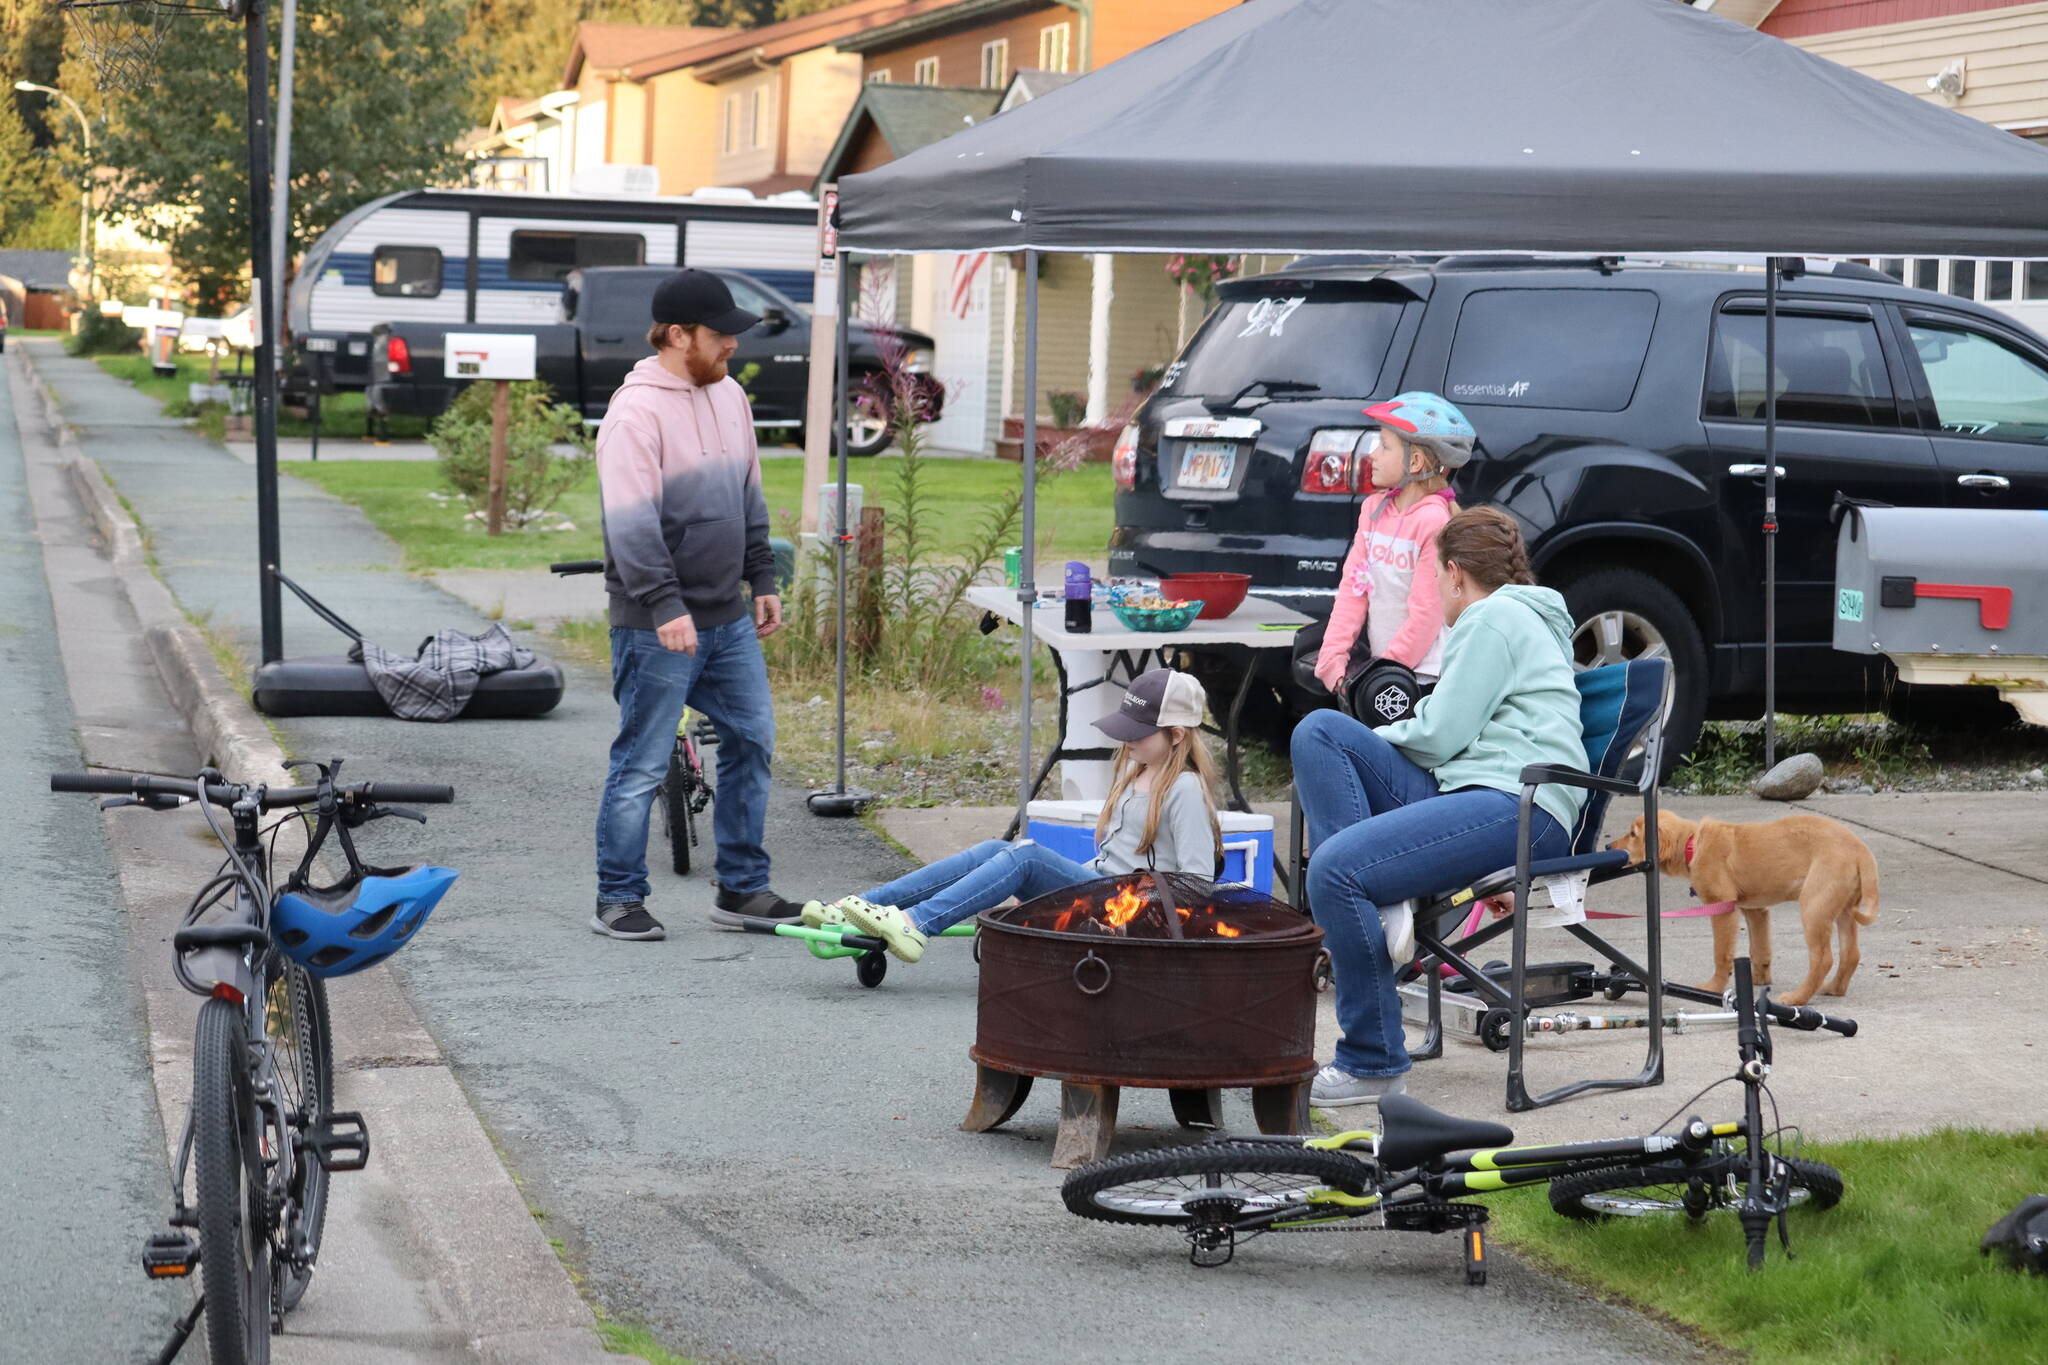 True to its name, the folks on Easy Street were taking it easy in the neighborhood on Juneau’s 14th annual National Night Out on Tuesday, Aug. 2. (Jonson Kuhn / Juneau Empire